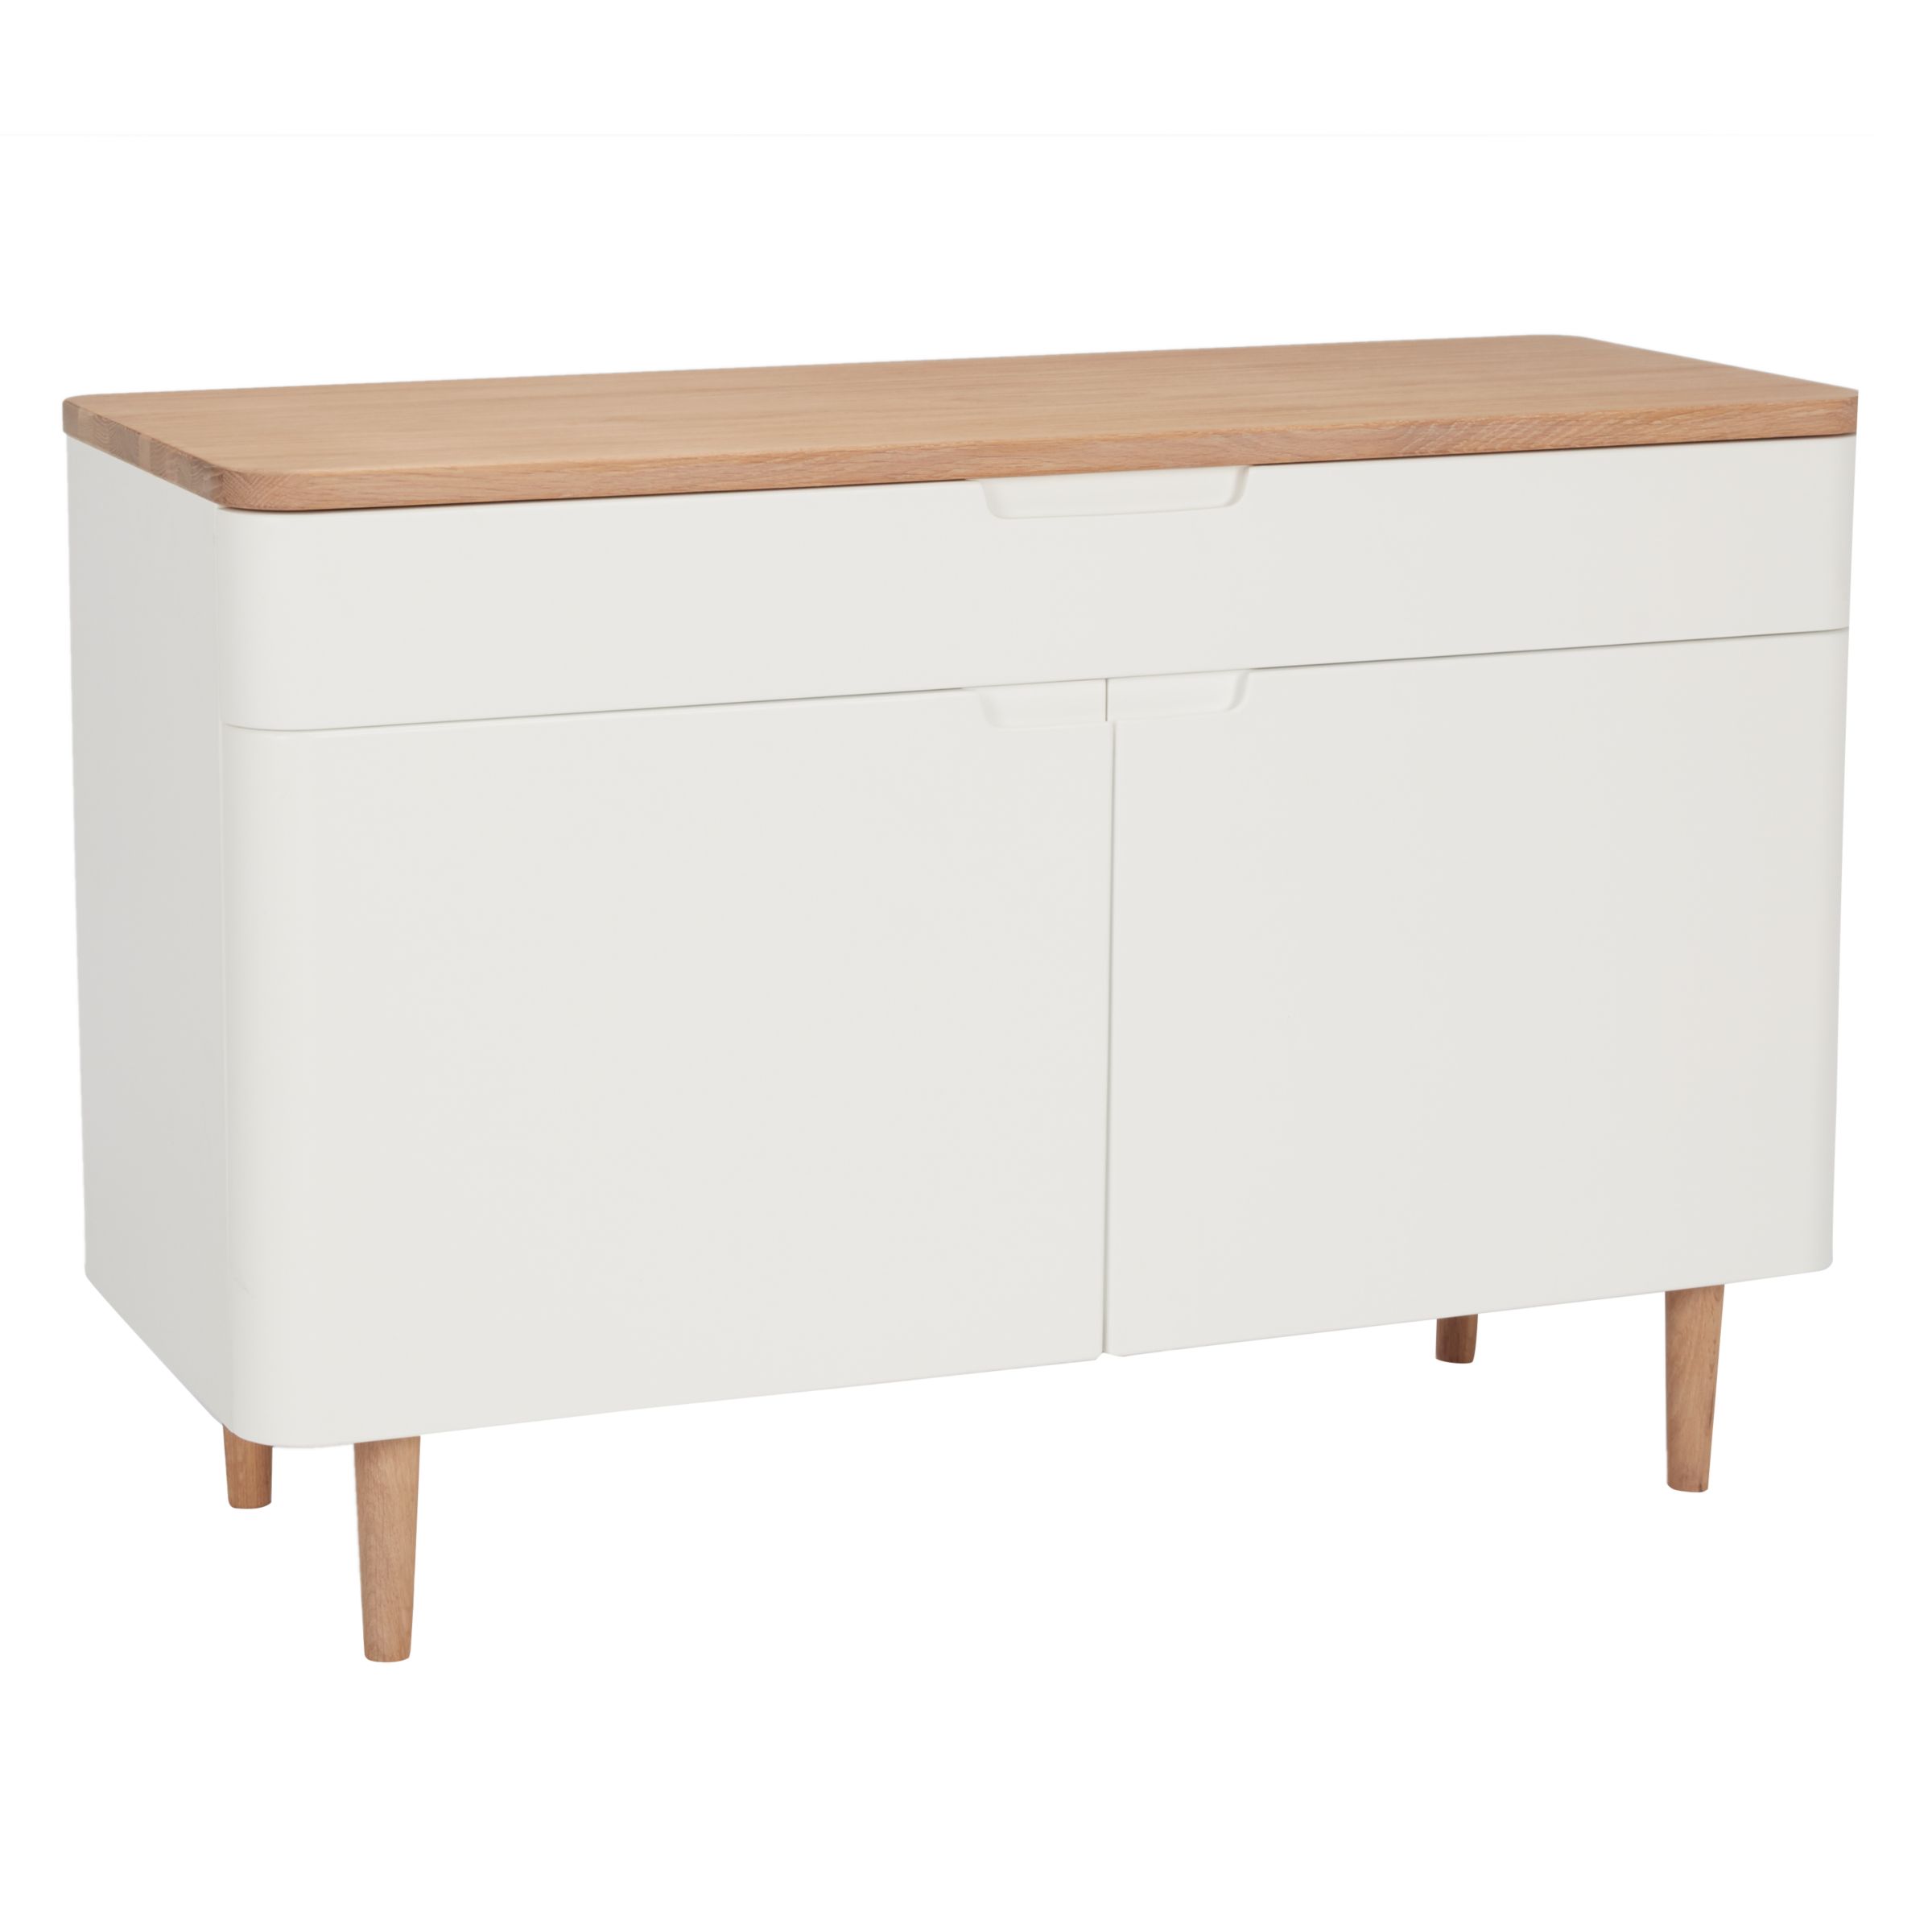 Photo of Ebbe gehl for john lewis mira small sideboard